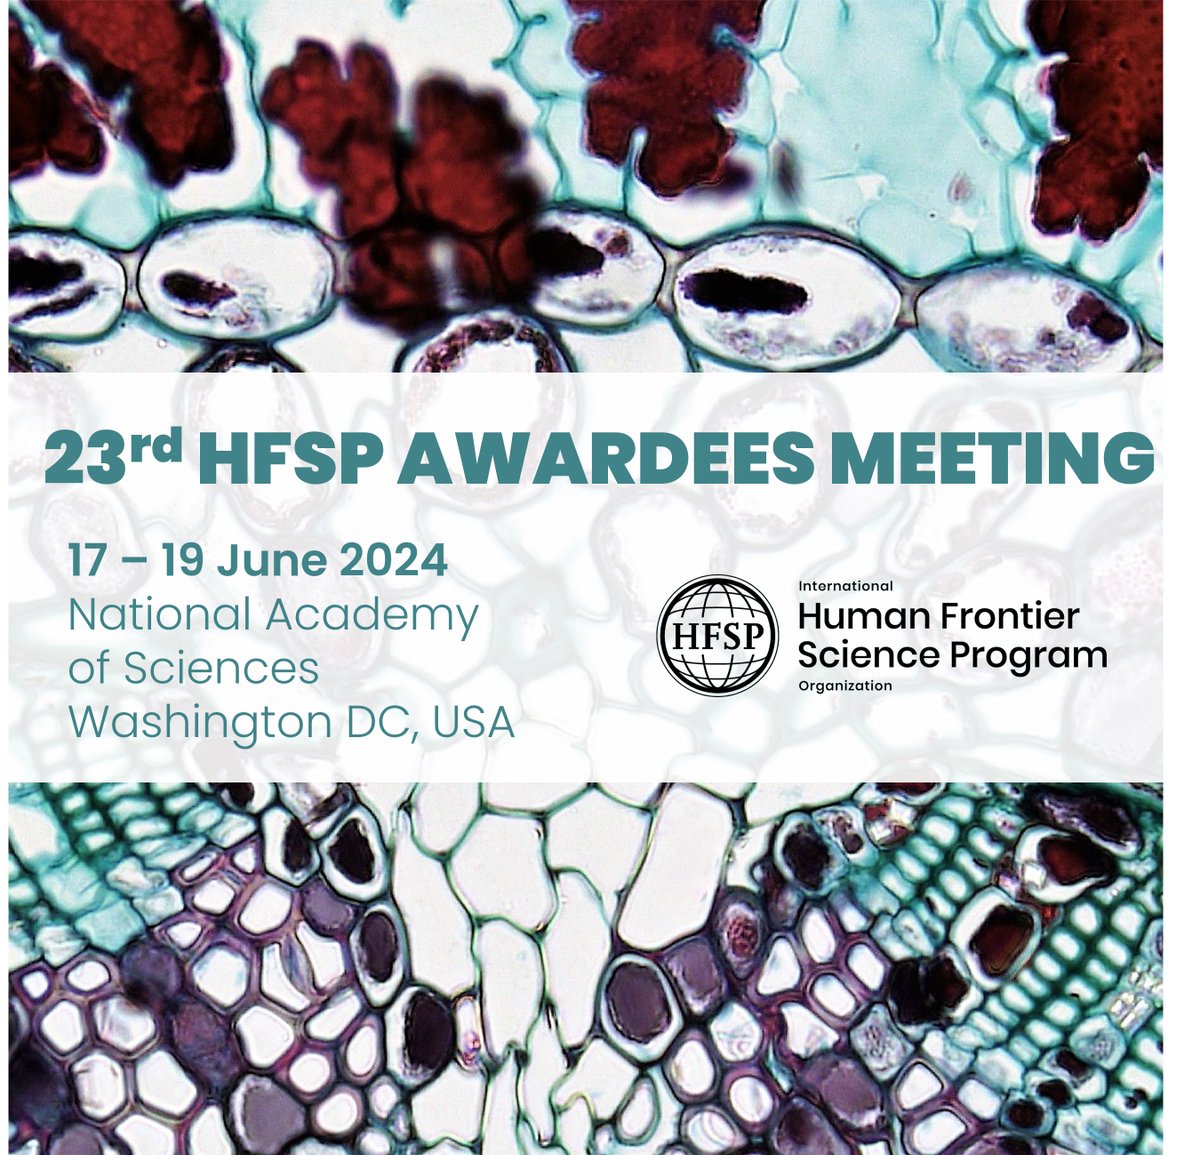 📅 Save the Date! 🌟 The 23rd HFSP Awardees Meeting is coming your way! Join us at the @theNASciences in #WashingtonDC #USA from June 17-19, 2024. #HFSPAwardees and #HFSPAlumni, are warmly invited🙃More details: hfsp.org/aam See you there! #HFSPmeeting2024